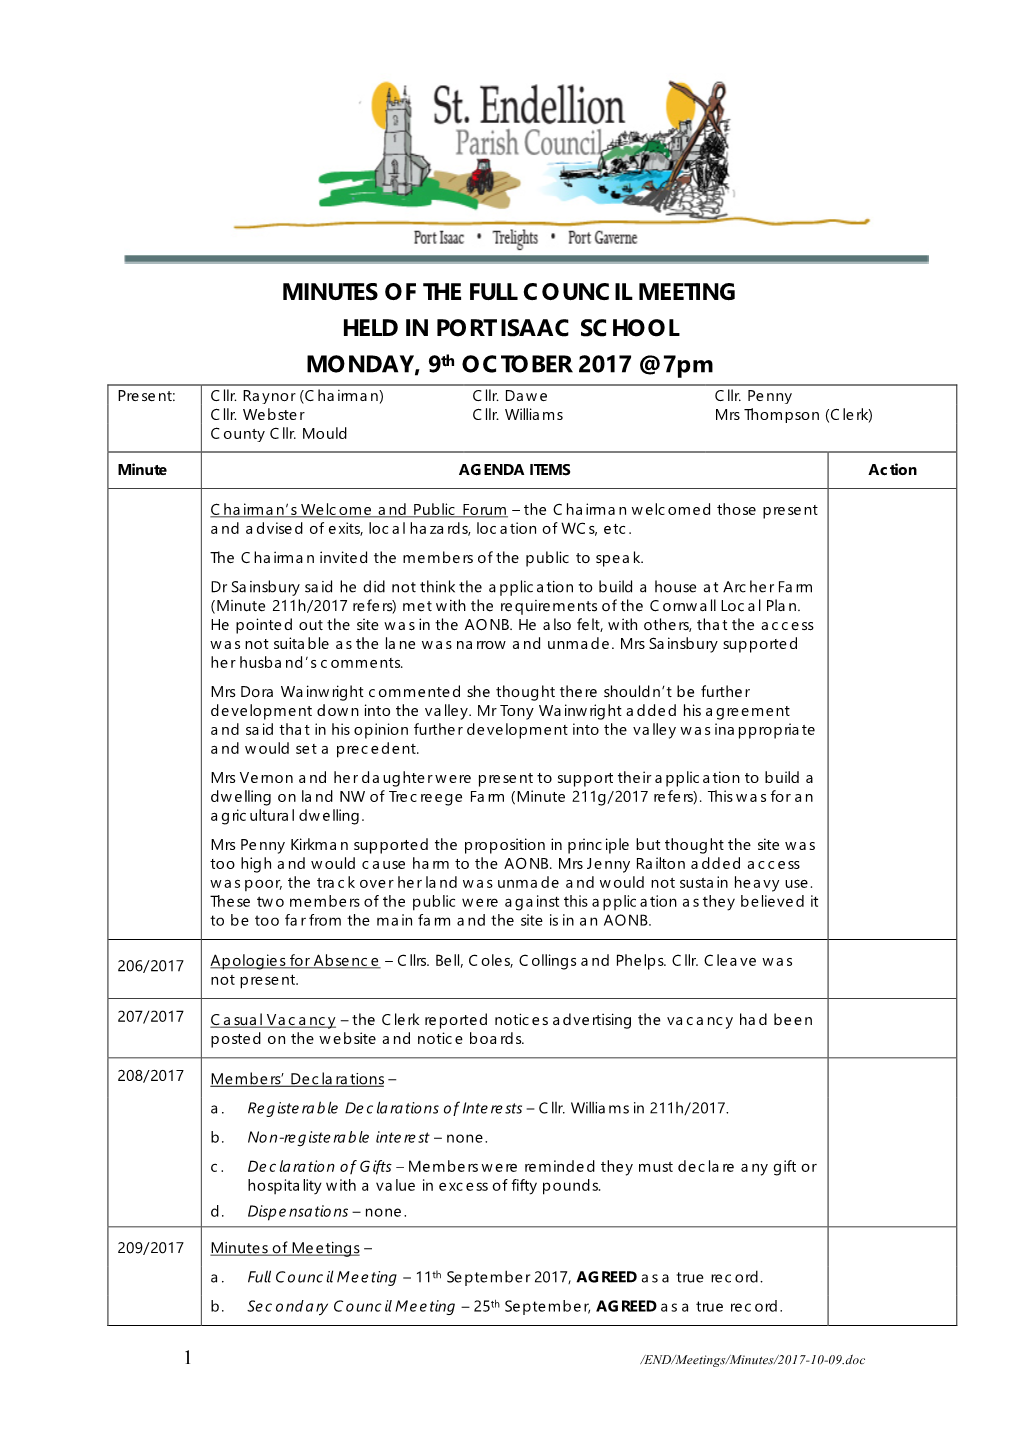 MINUTES of the FULL COUNCIL MEETING HELD in PORT ISAAC SCHOOL MONDAY, 9Th OCTOBER 2017 @ 7Pm Present: Cllr